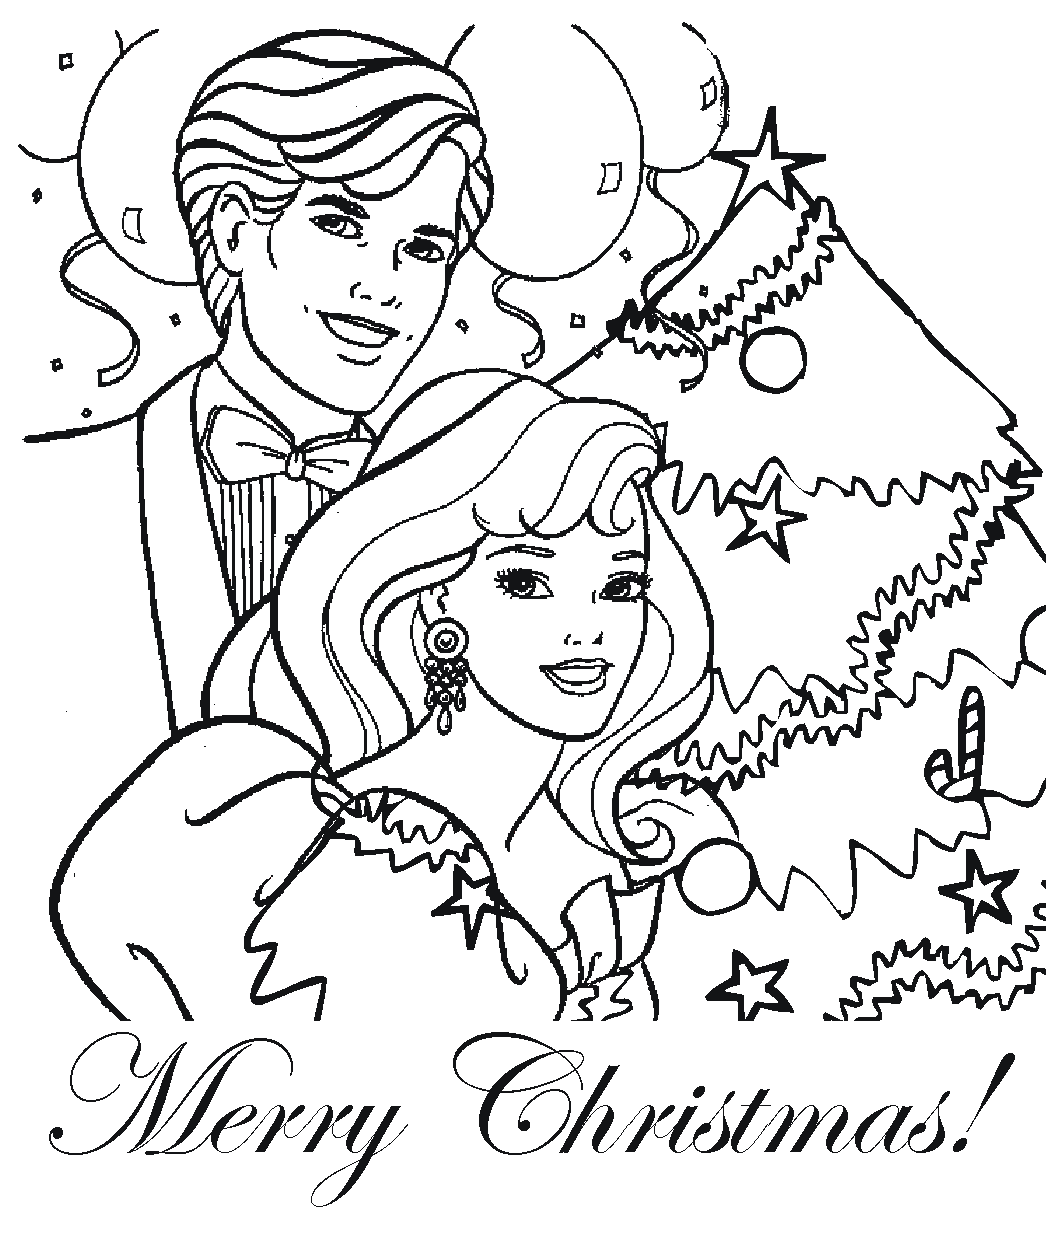 year without a santa clause coloring pages - photo #49